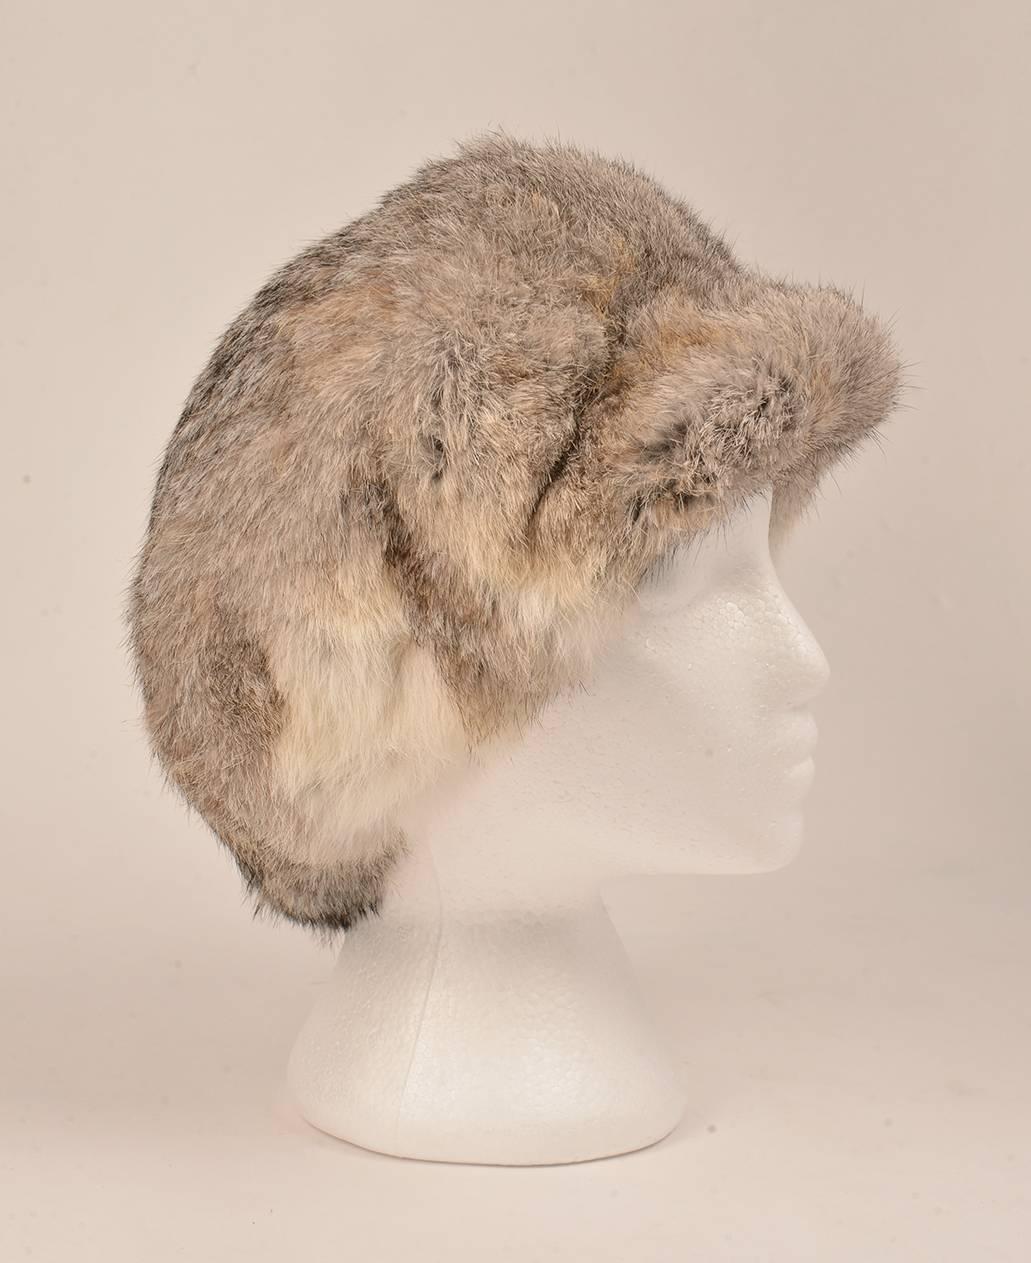 Vintage 1960s Adolfo II hat. This plush hat is made of rabbit fur, and features a bill to protect the wearer's eyes from the sun. The gorgeous, sumptuous fur is extremely soft, and is long enough to keep the head and ears warm. The fur exhibits a